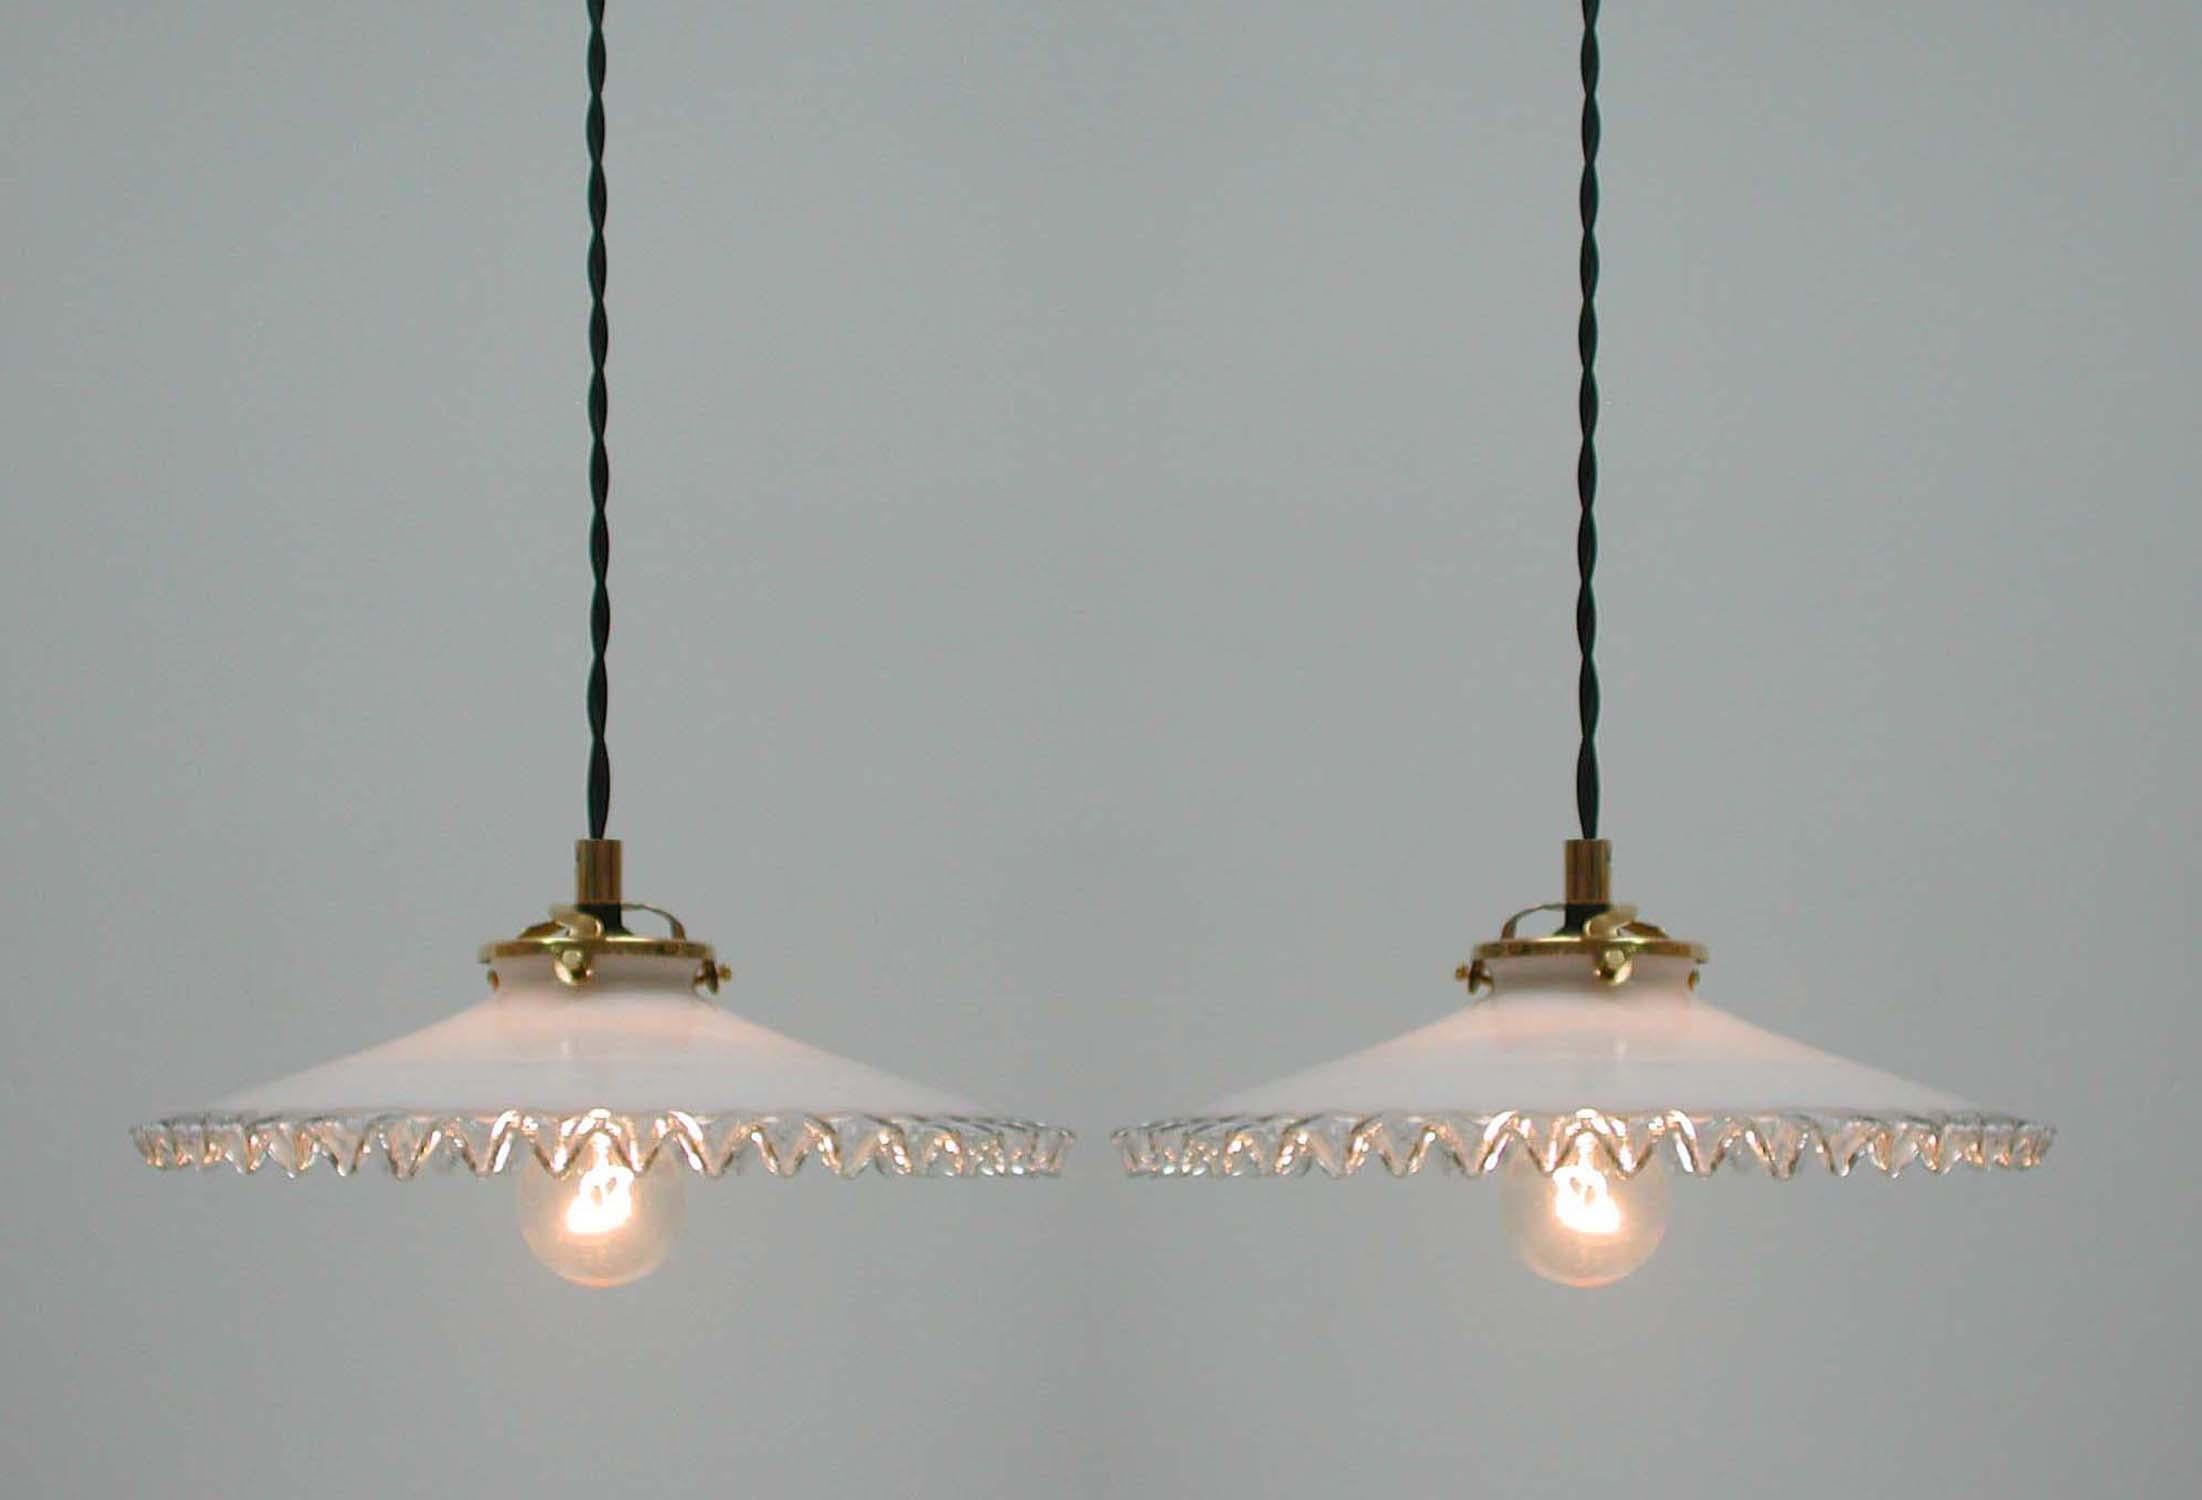 Midcentury French Opaline Glass Pendant Lamps, 1950s, Set of Two For Sale 2